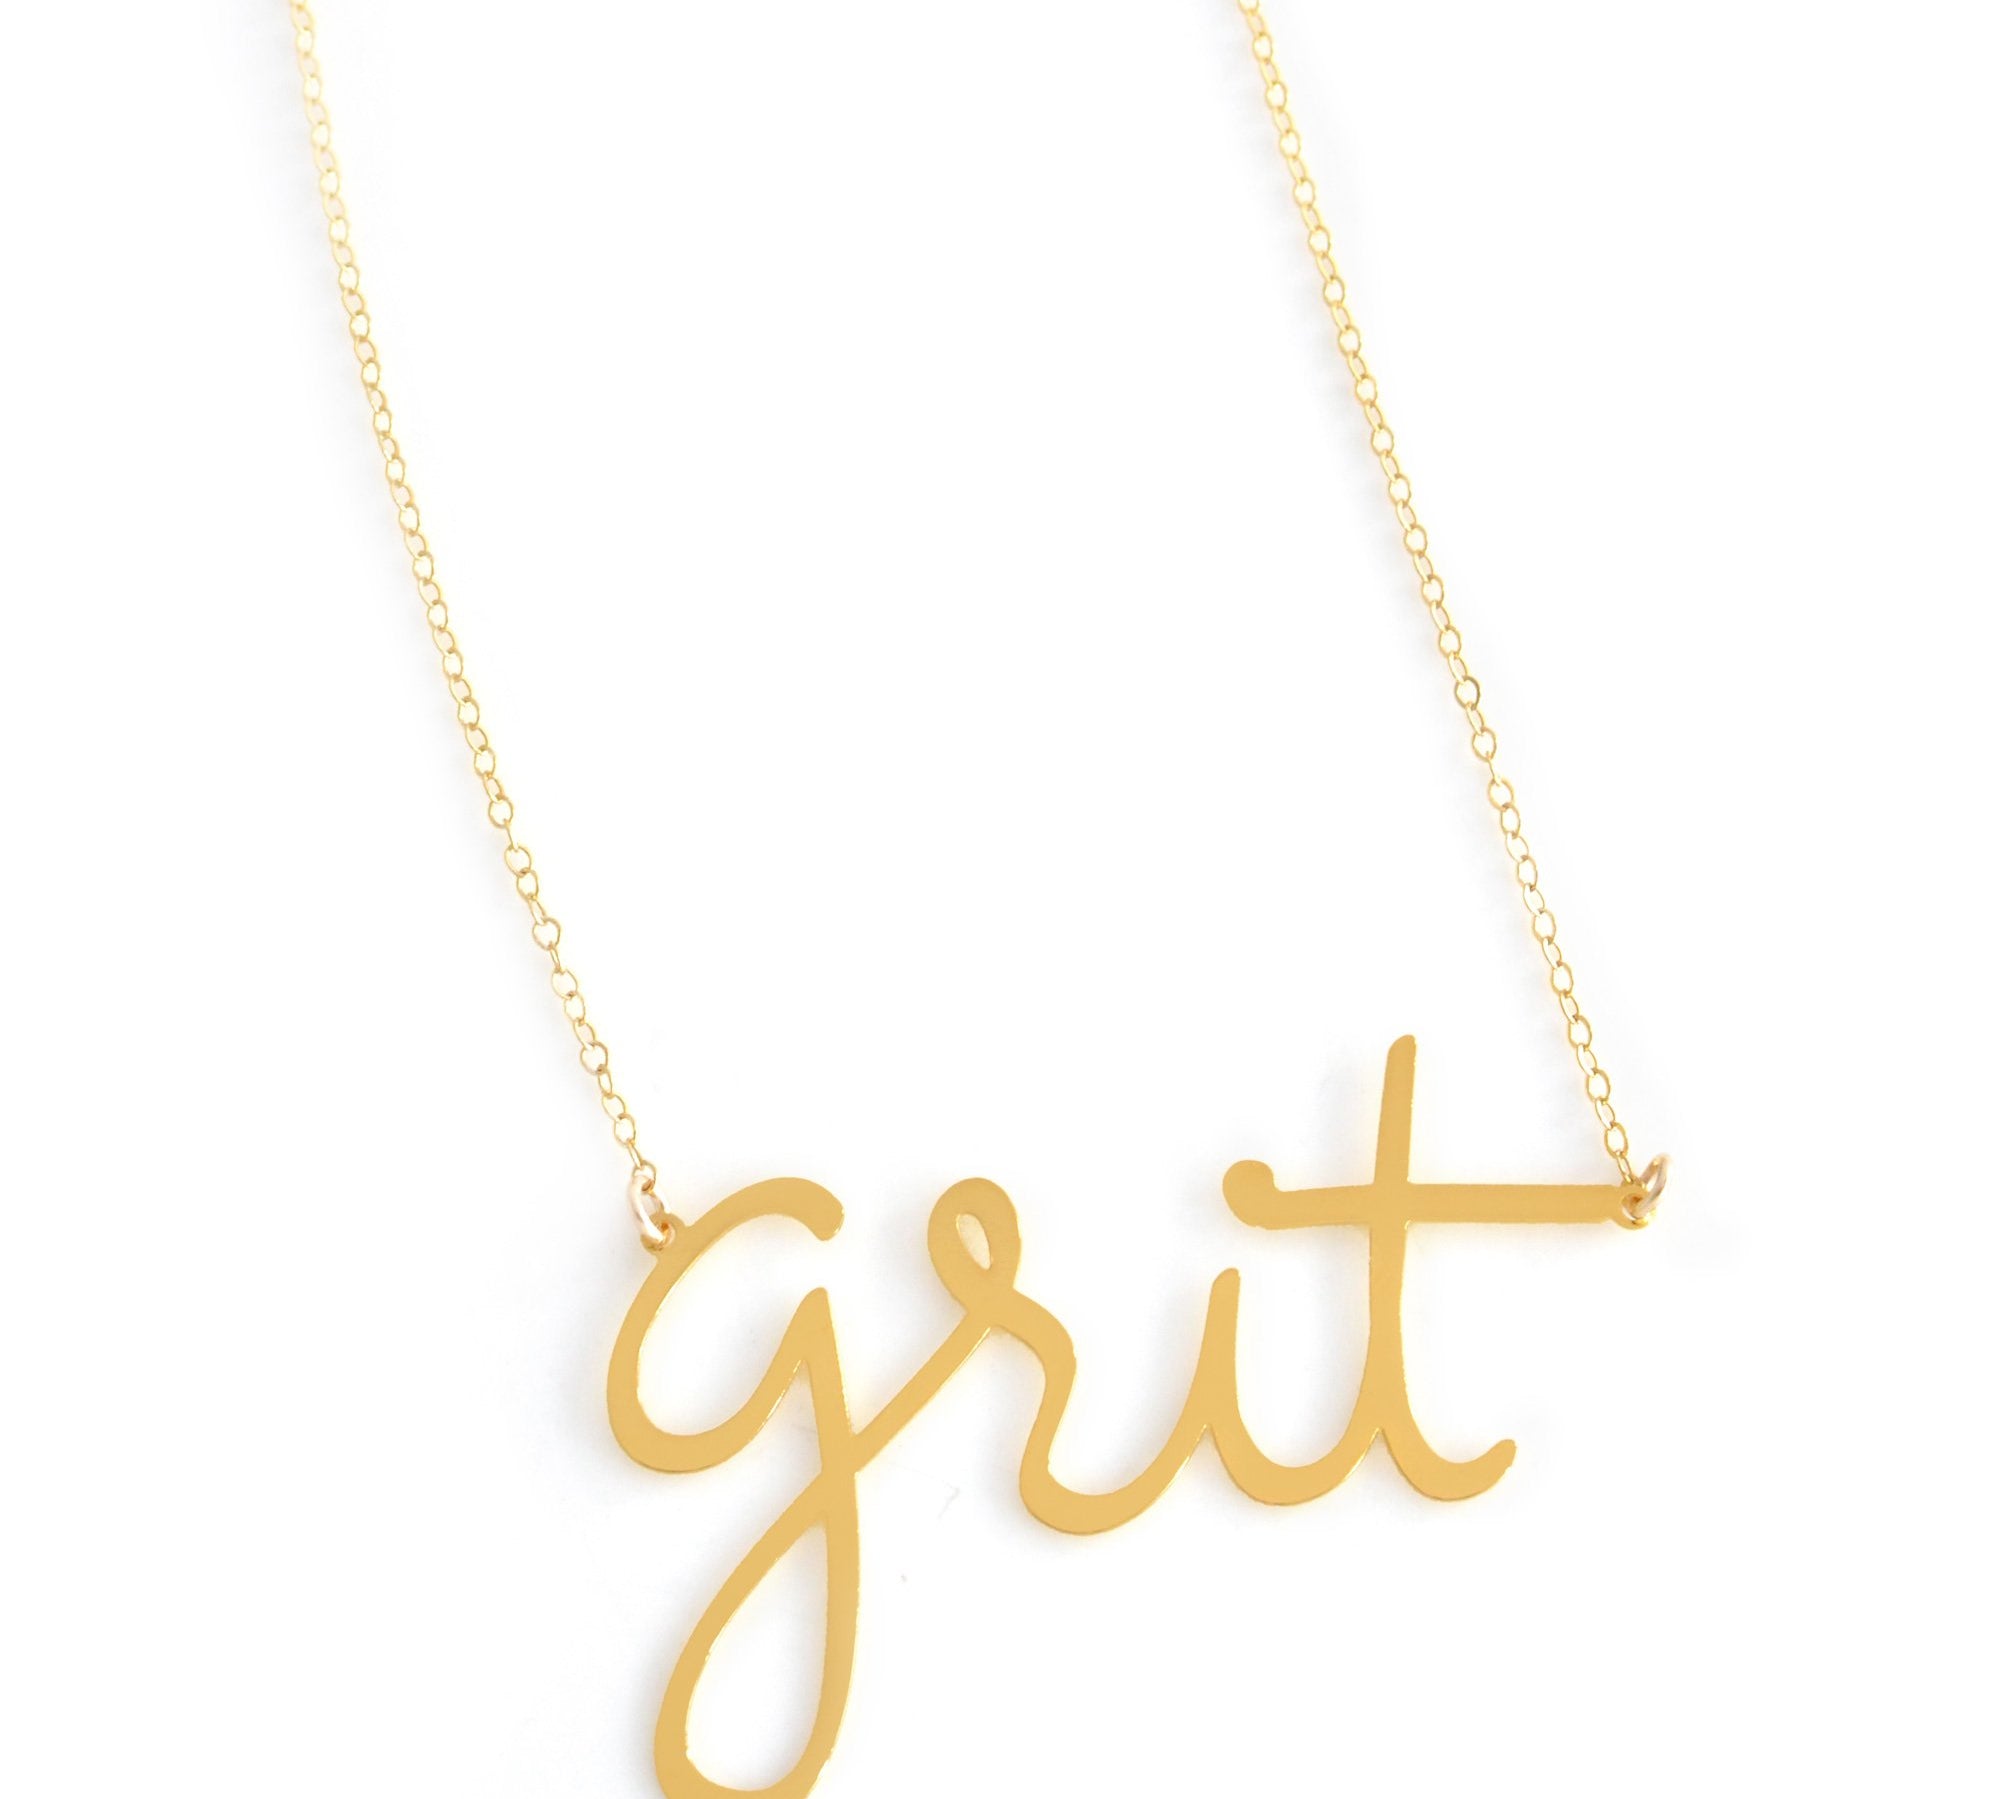 Grit Necklace - High Quality, Affordable, Hand Written, Empowering, Self Love, Mantra Word Necklace - Available in Gold and Silver - Small and Large Sizes - Made in USA - Brevity Jewelry